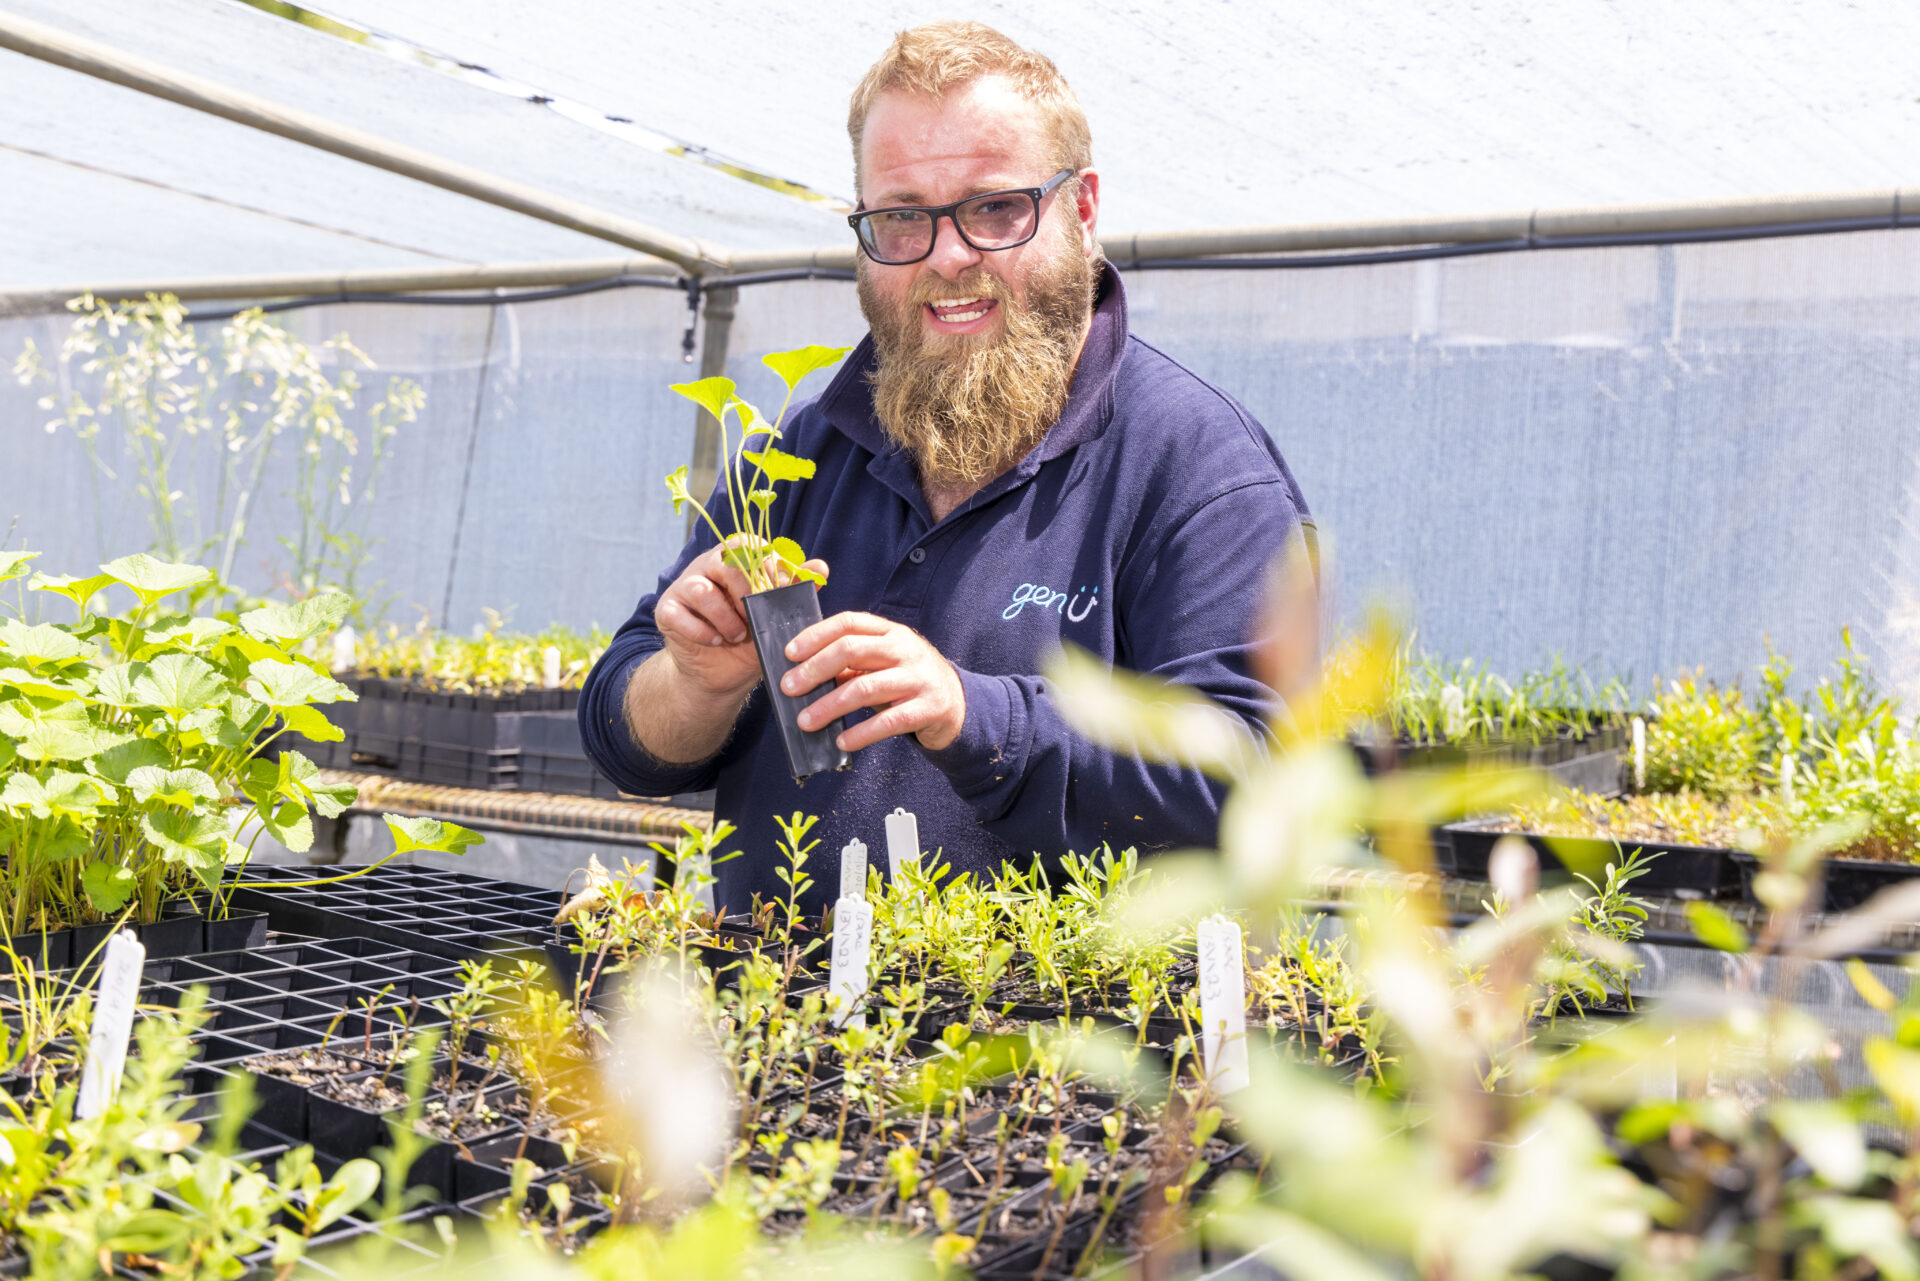 Supported employee Jack is smiling and standing in the shade house holding a plant. He is surrounded by trays of other plants in small black plastic tubs.